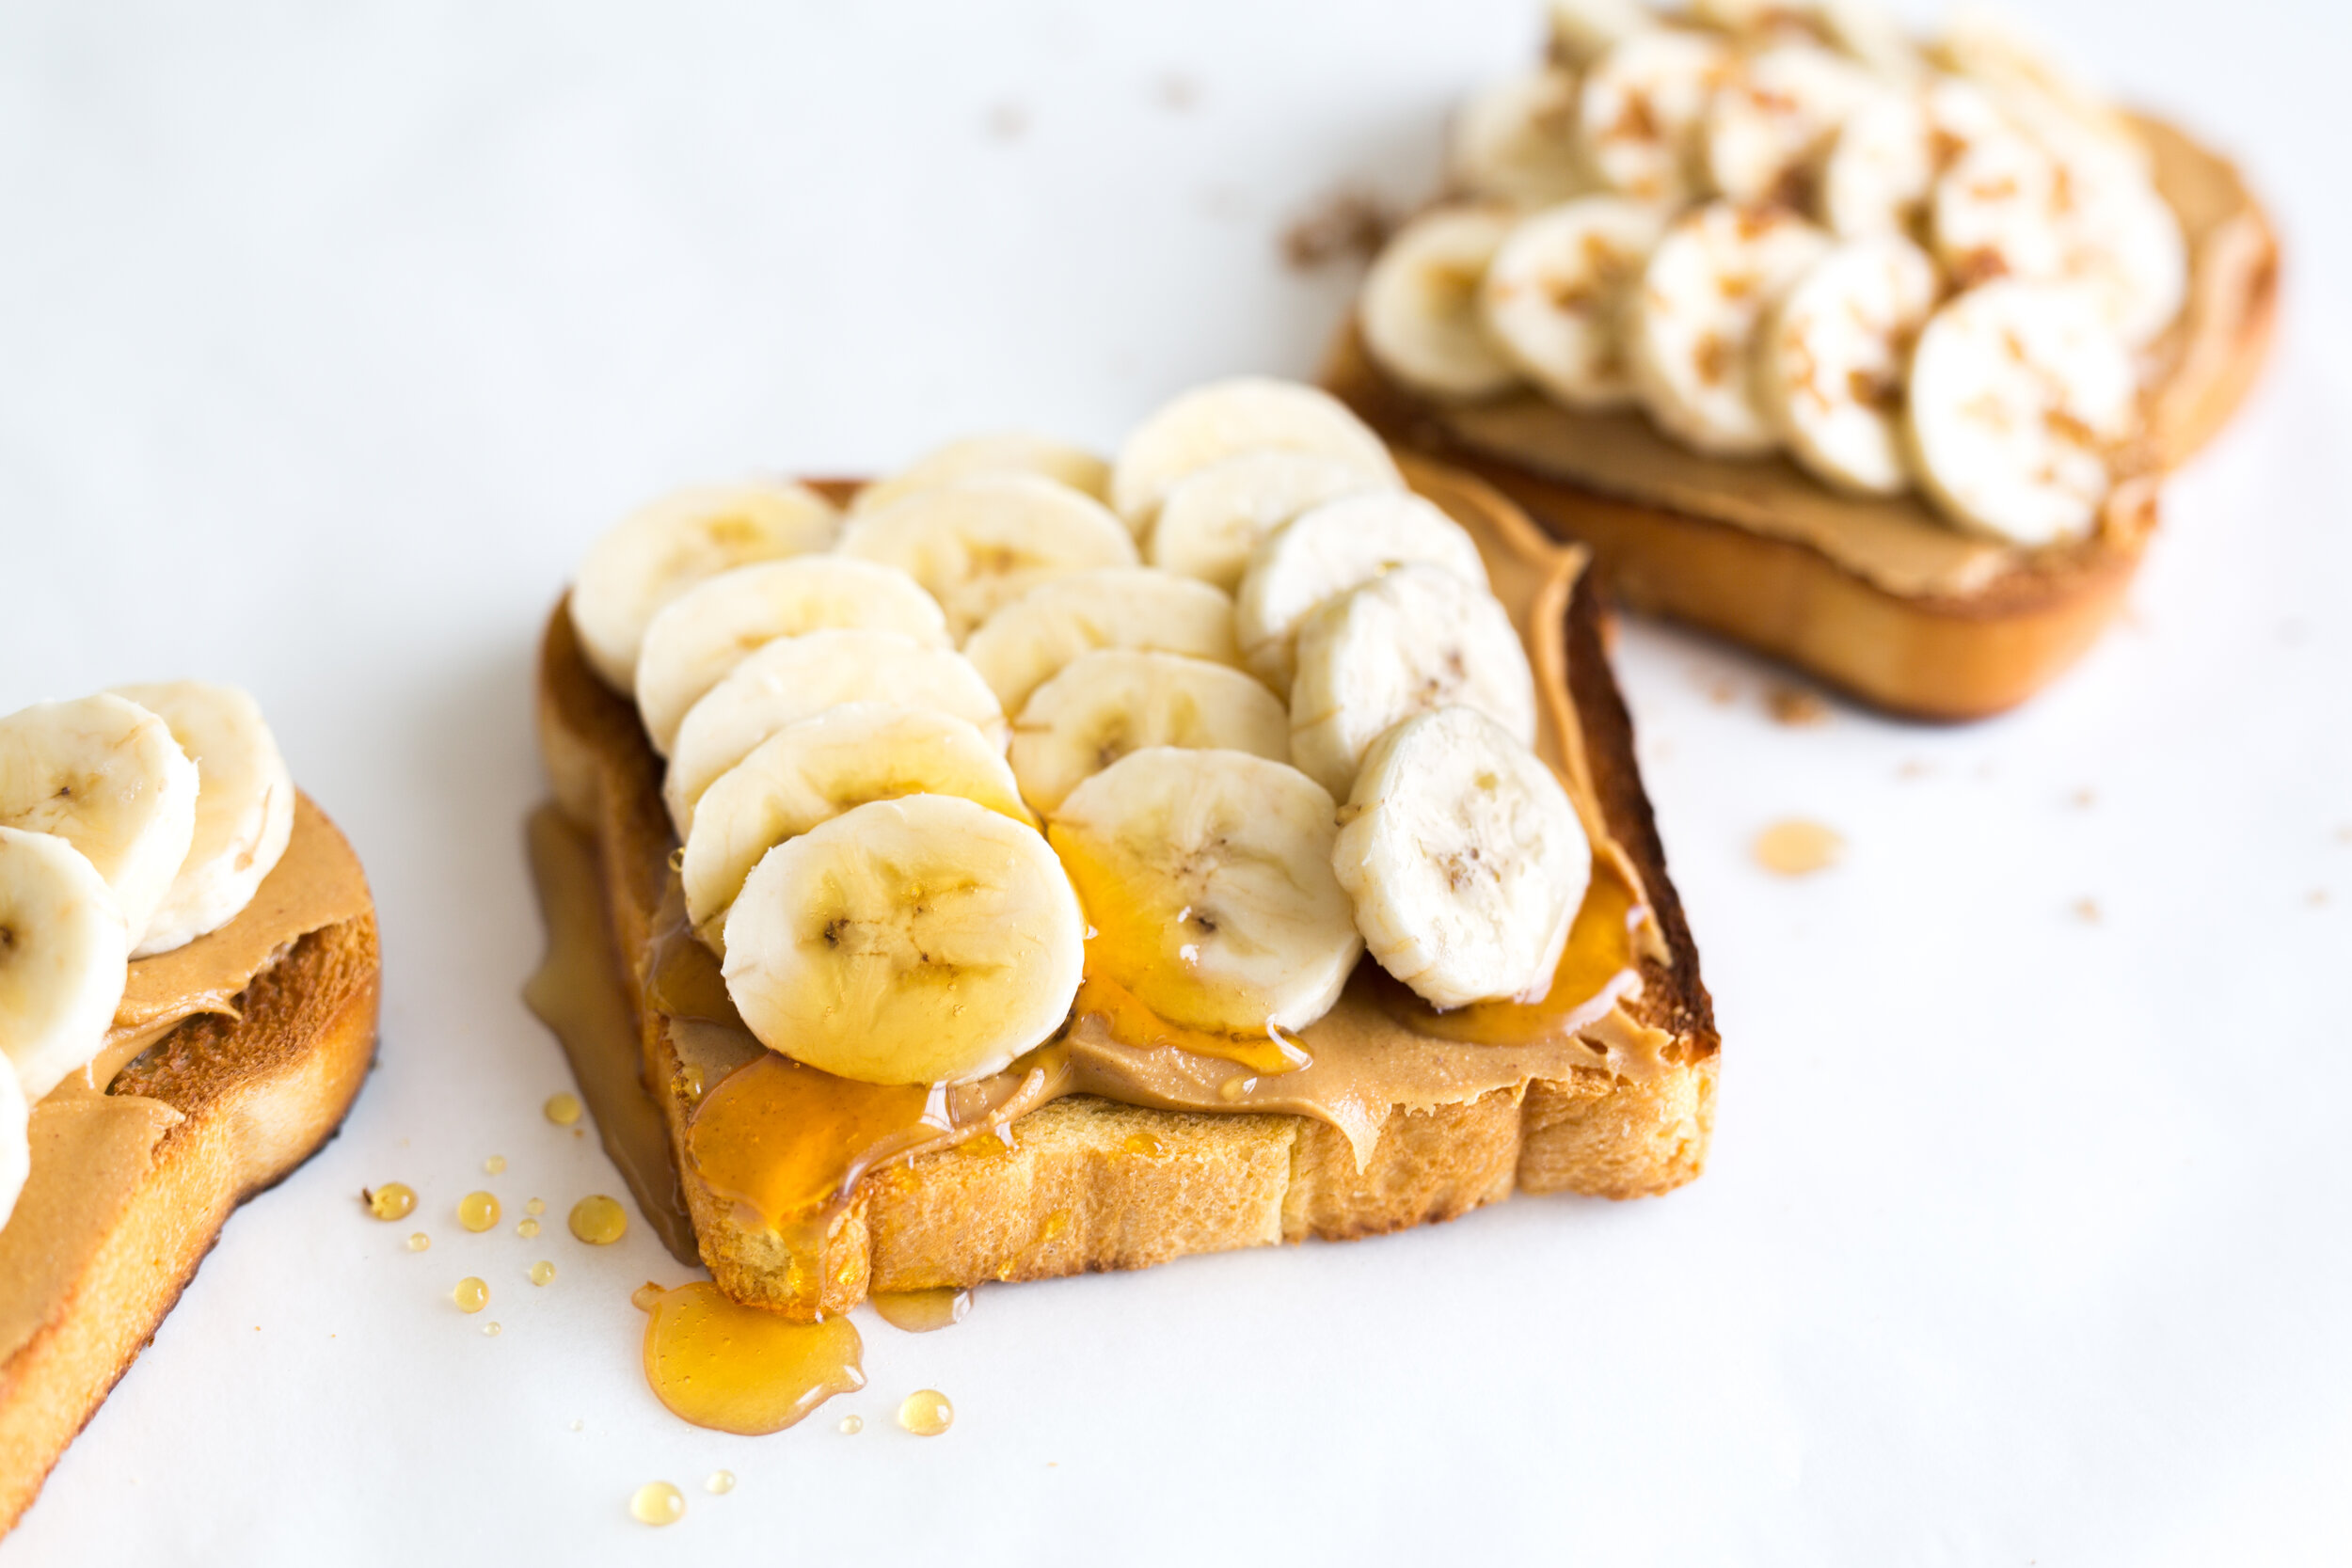 Peanut Butter and Bananas 